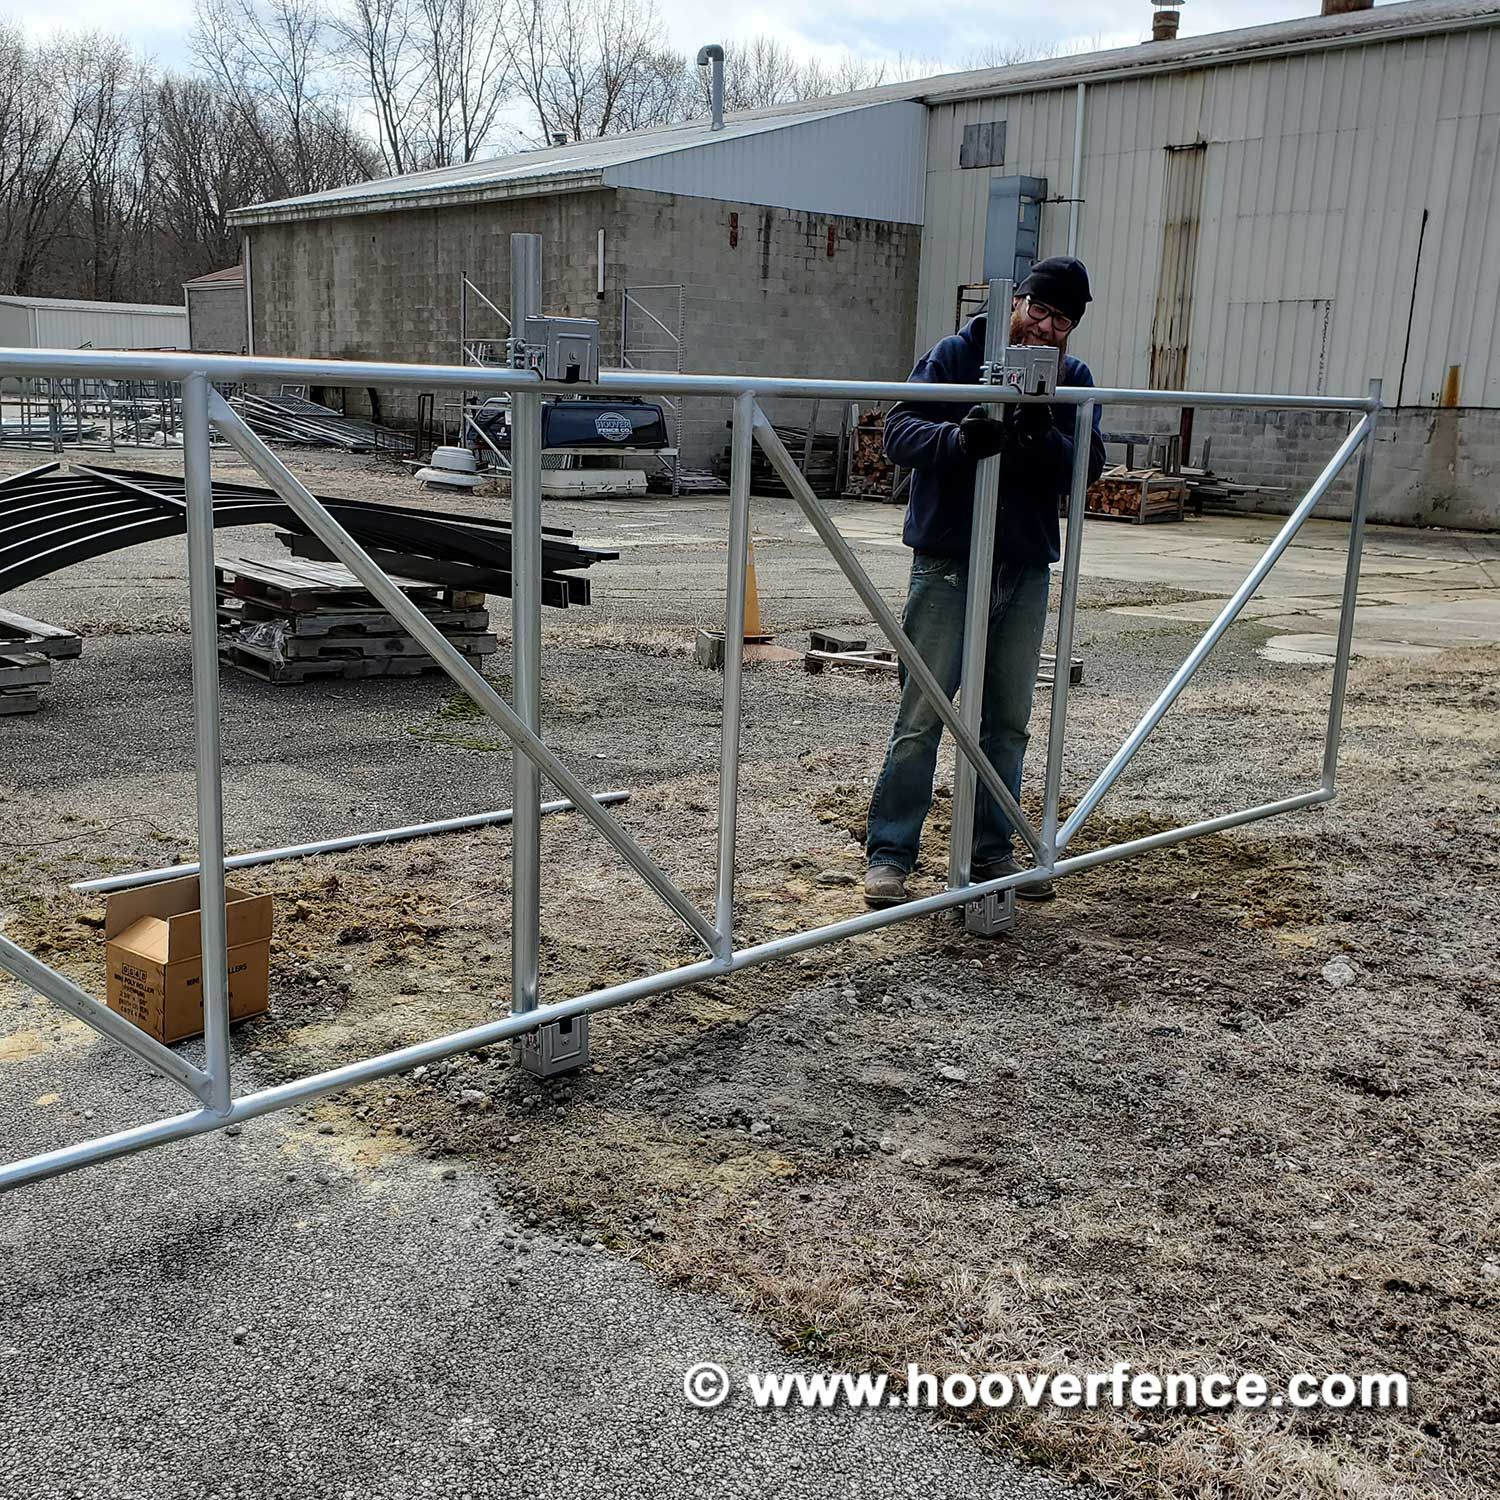 Hoover Fence Residential Chain Link Sliding Cantilever Gates Galvanized,  Black, Brown, or Green Hoover Fence Co.